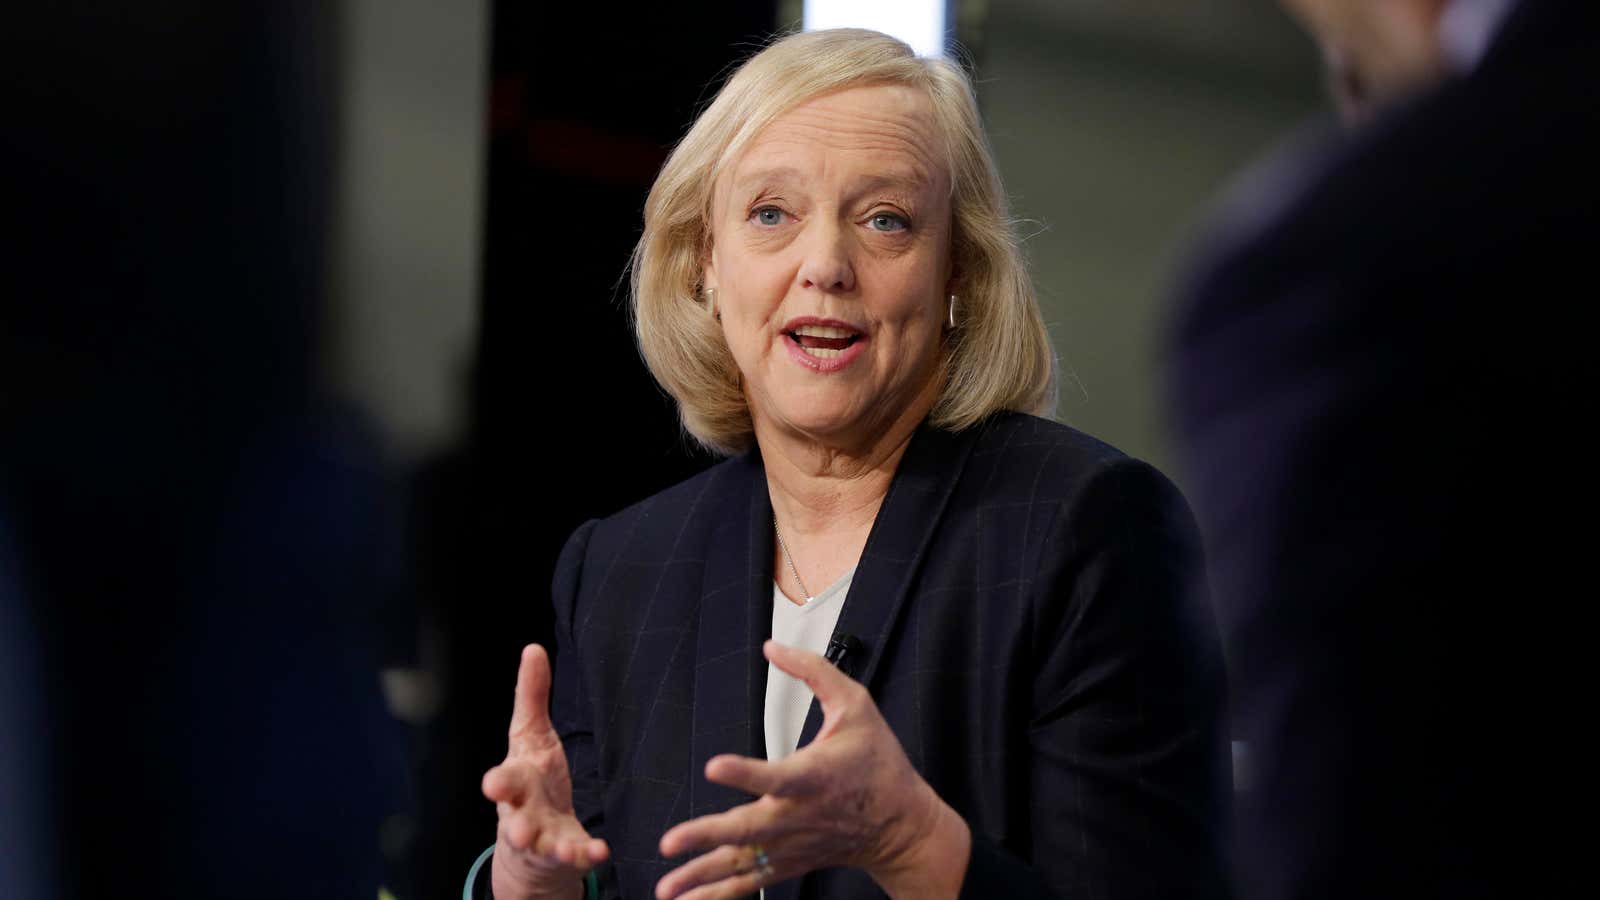 “Country before party,” says Meg Whitman.